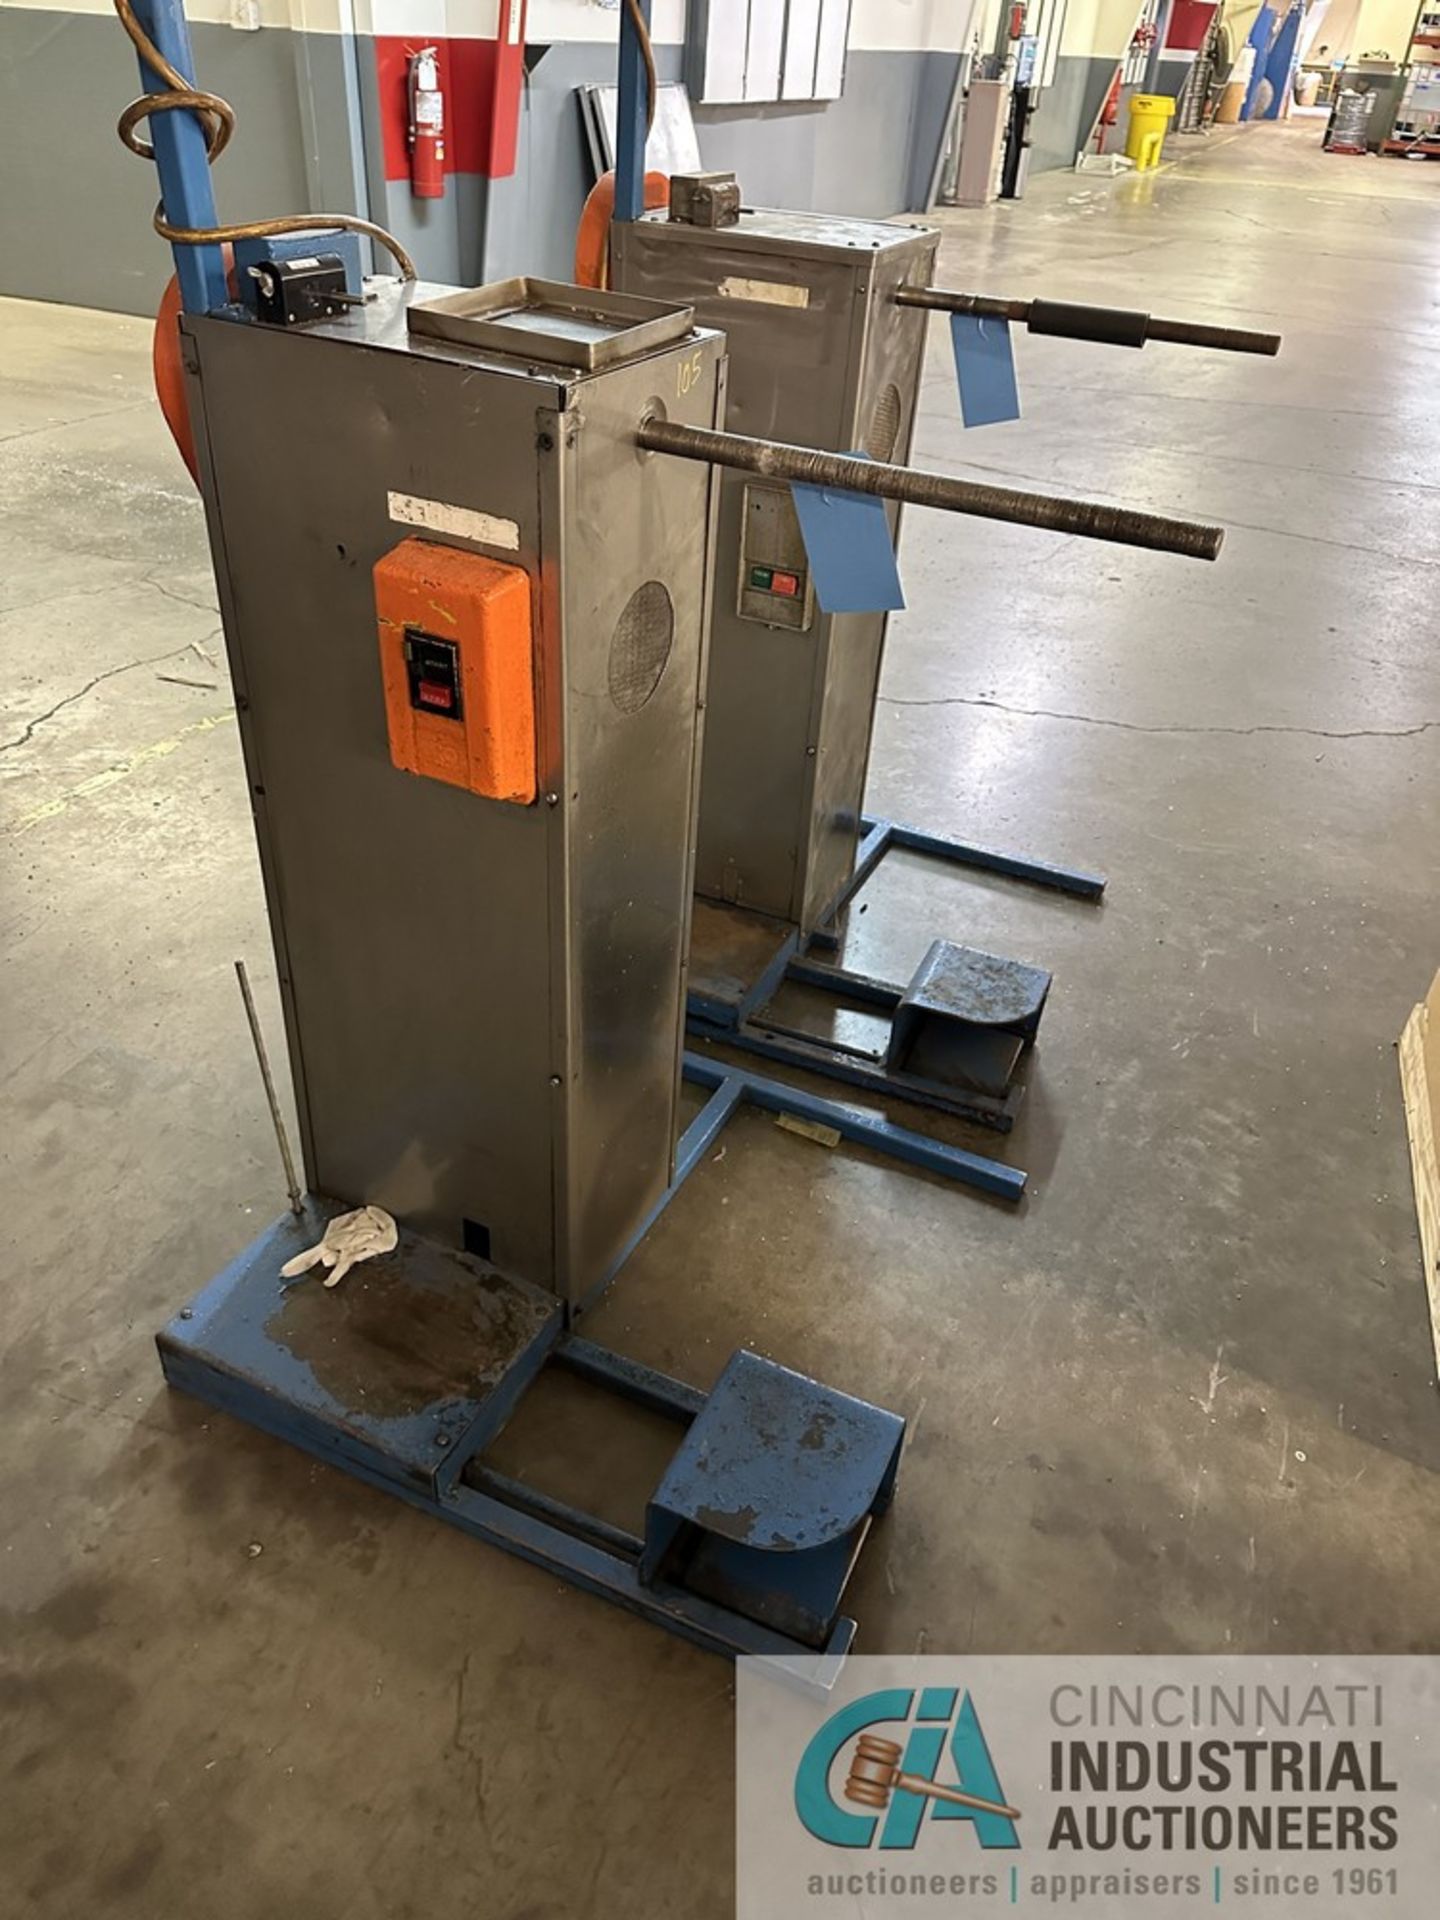 MOTORIZED WINDER STAND, 18" ARM - Located in back of rear extruder room